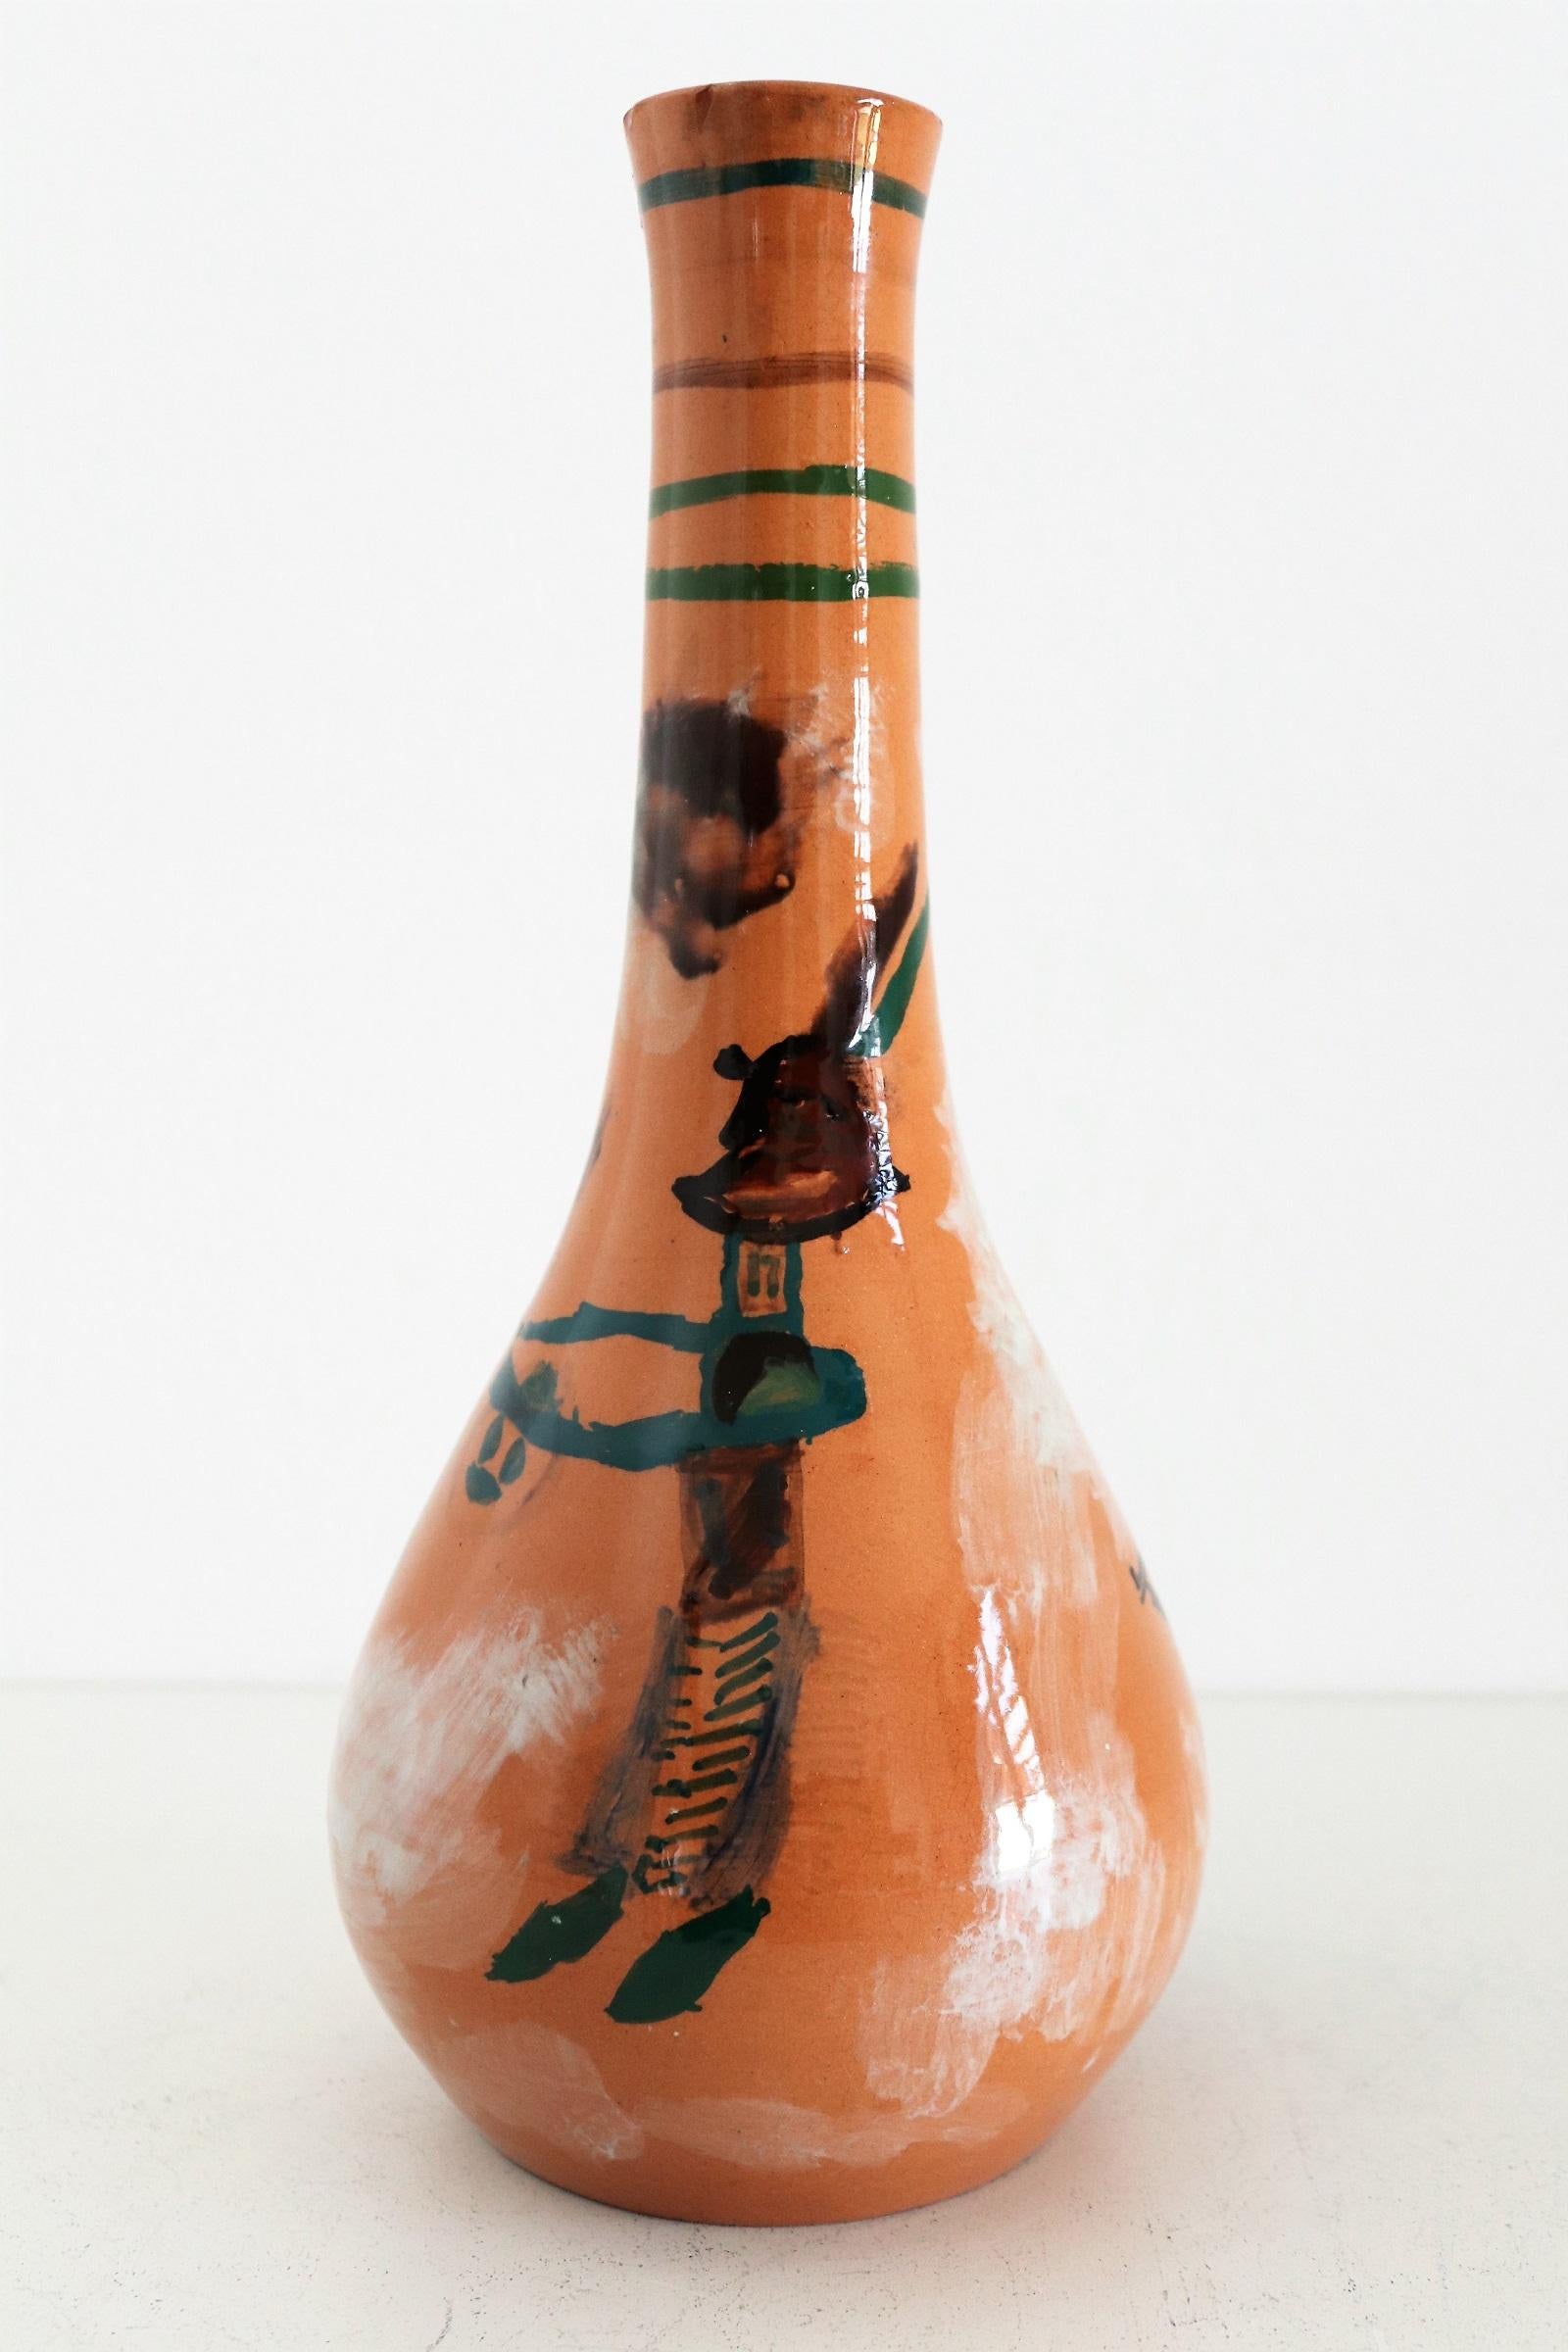 Gorgeous and rare, unique ceramic vase hand painted and signed with G.R. by artist from Italian ceramic studio Orobico Arte Artigianato (ART RUMI) in the 1950s.
The vase is made of ceramic like red clay and hand painted with several naive